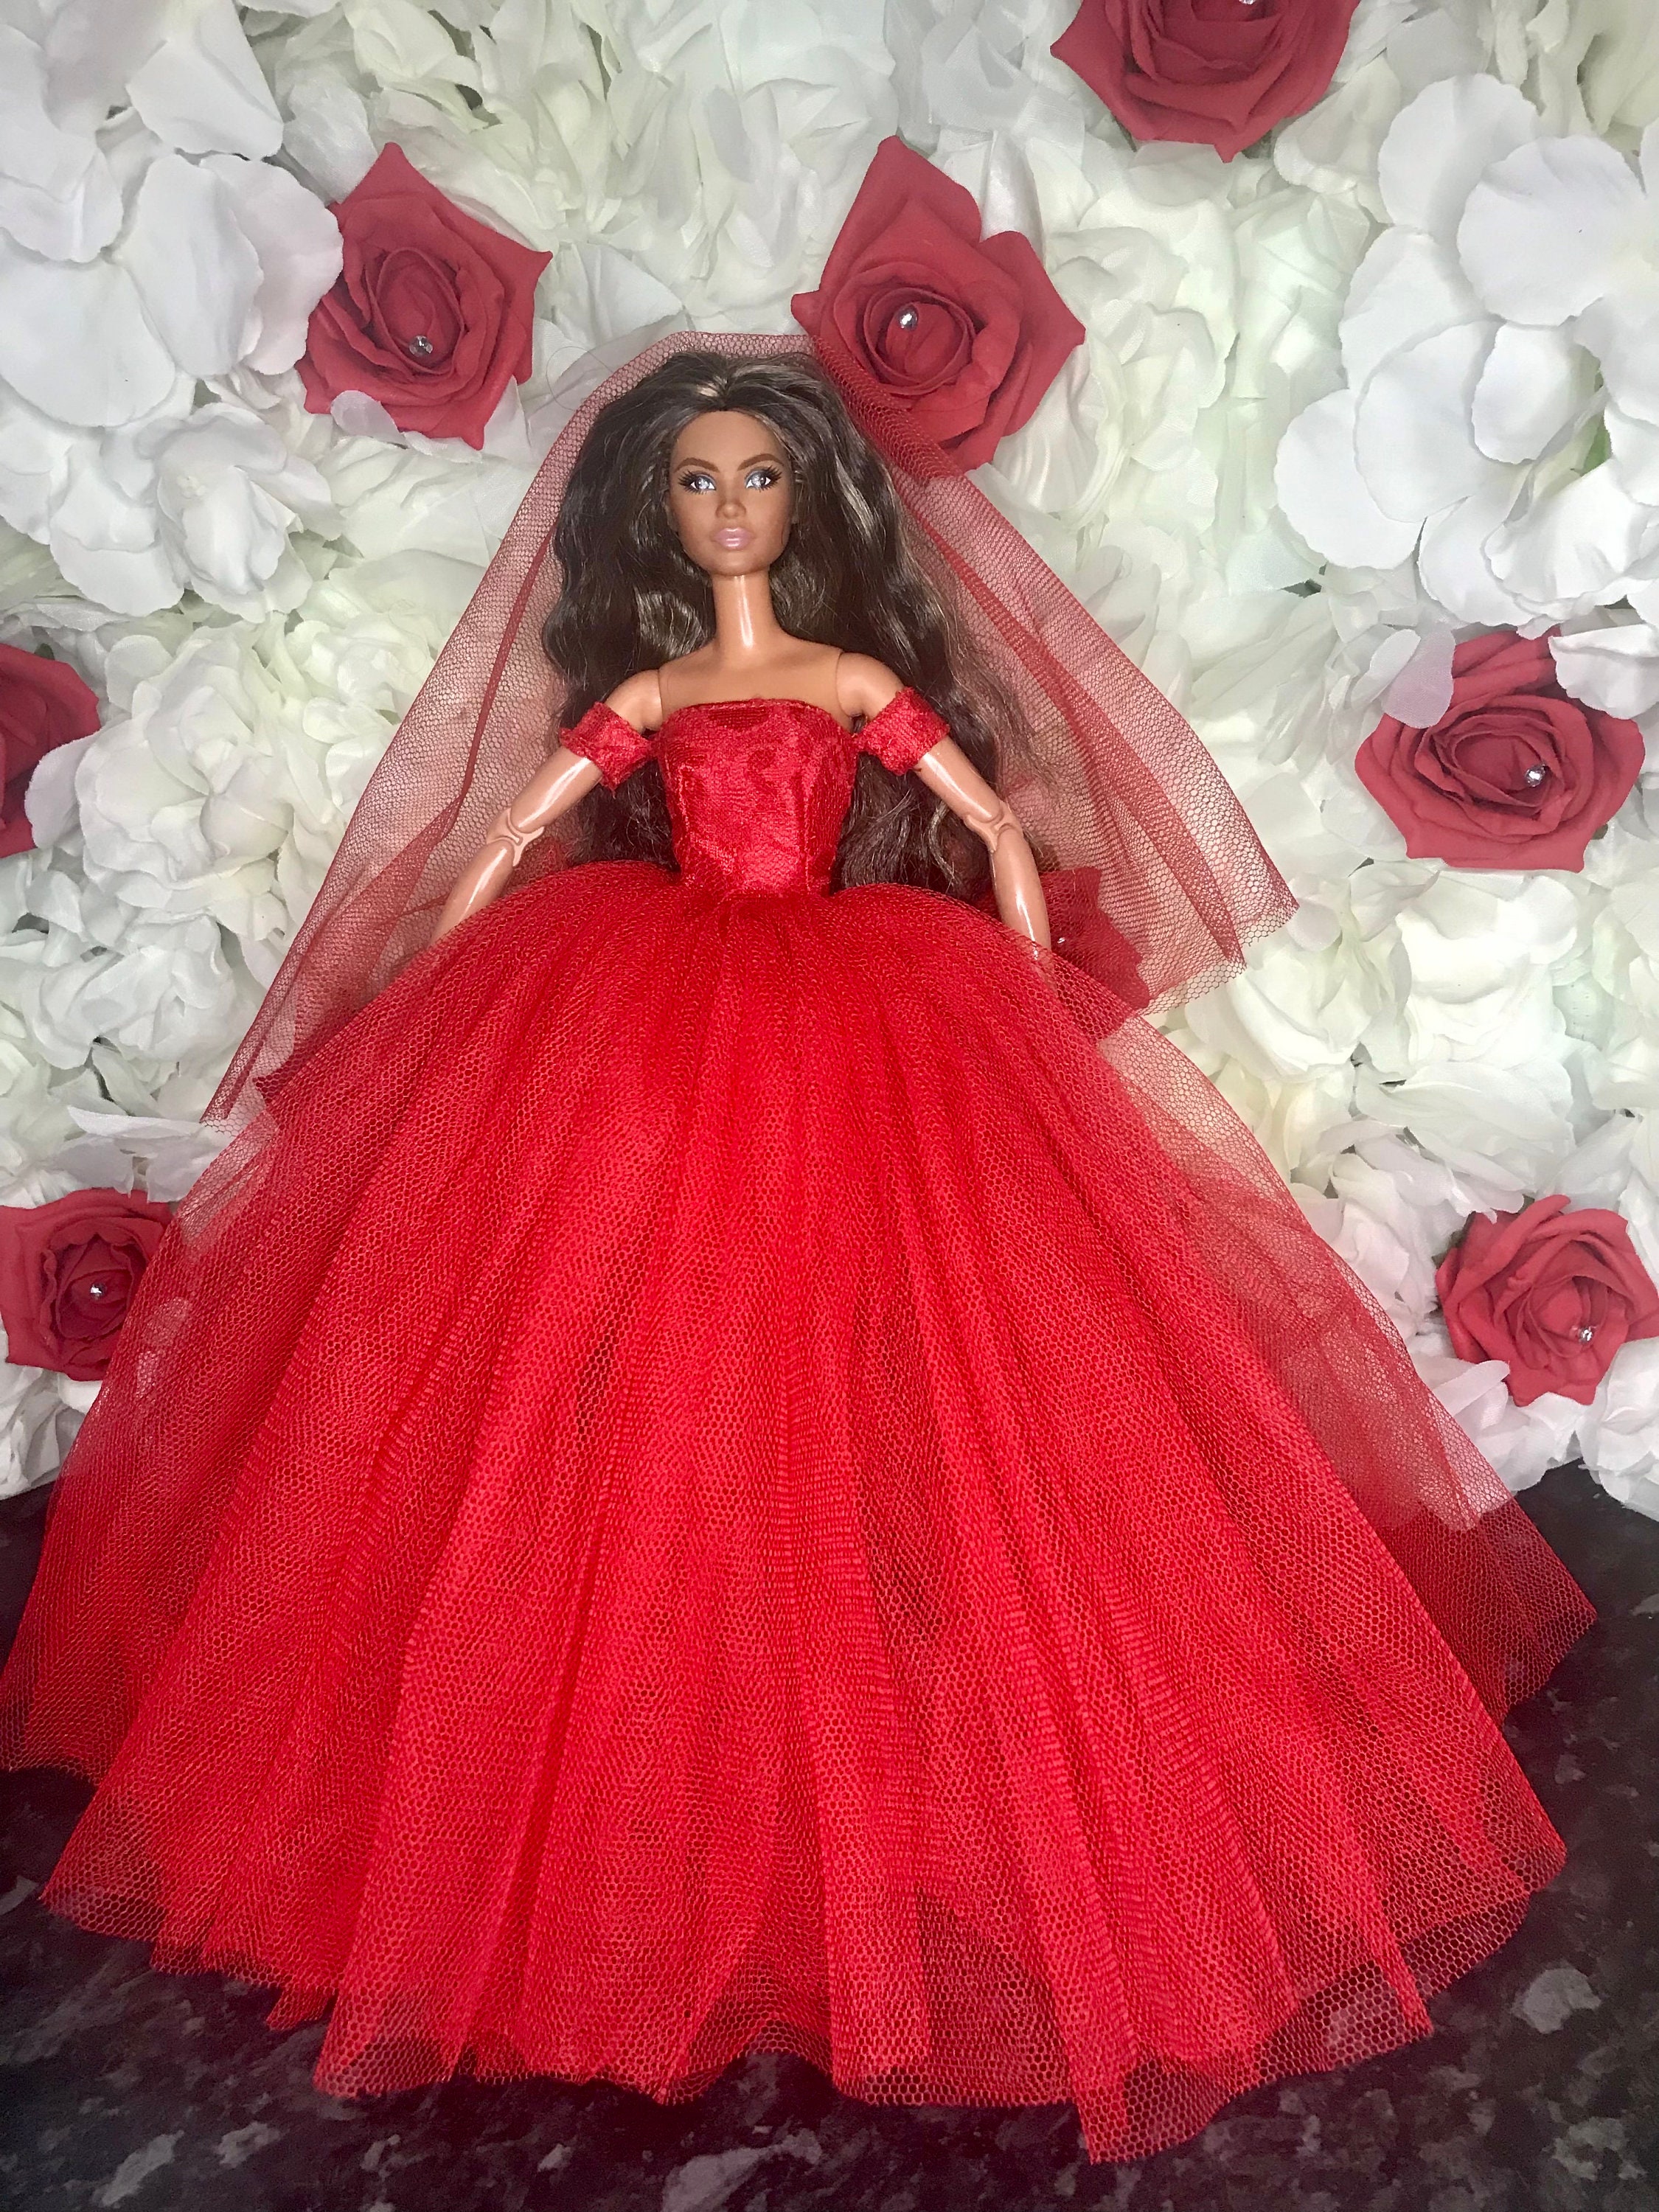 Red Glitter Barbie Gown | Etsy | Barbie gowns, Barbie fashion, Barbie